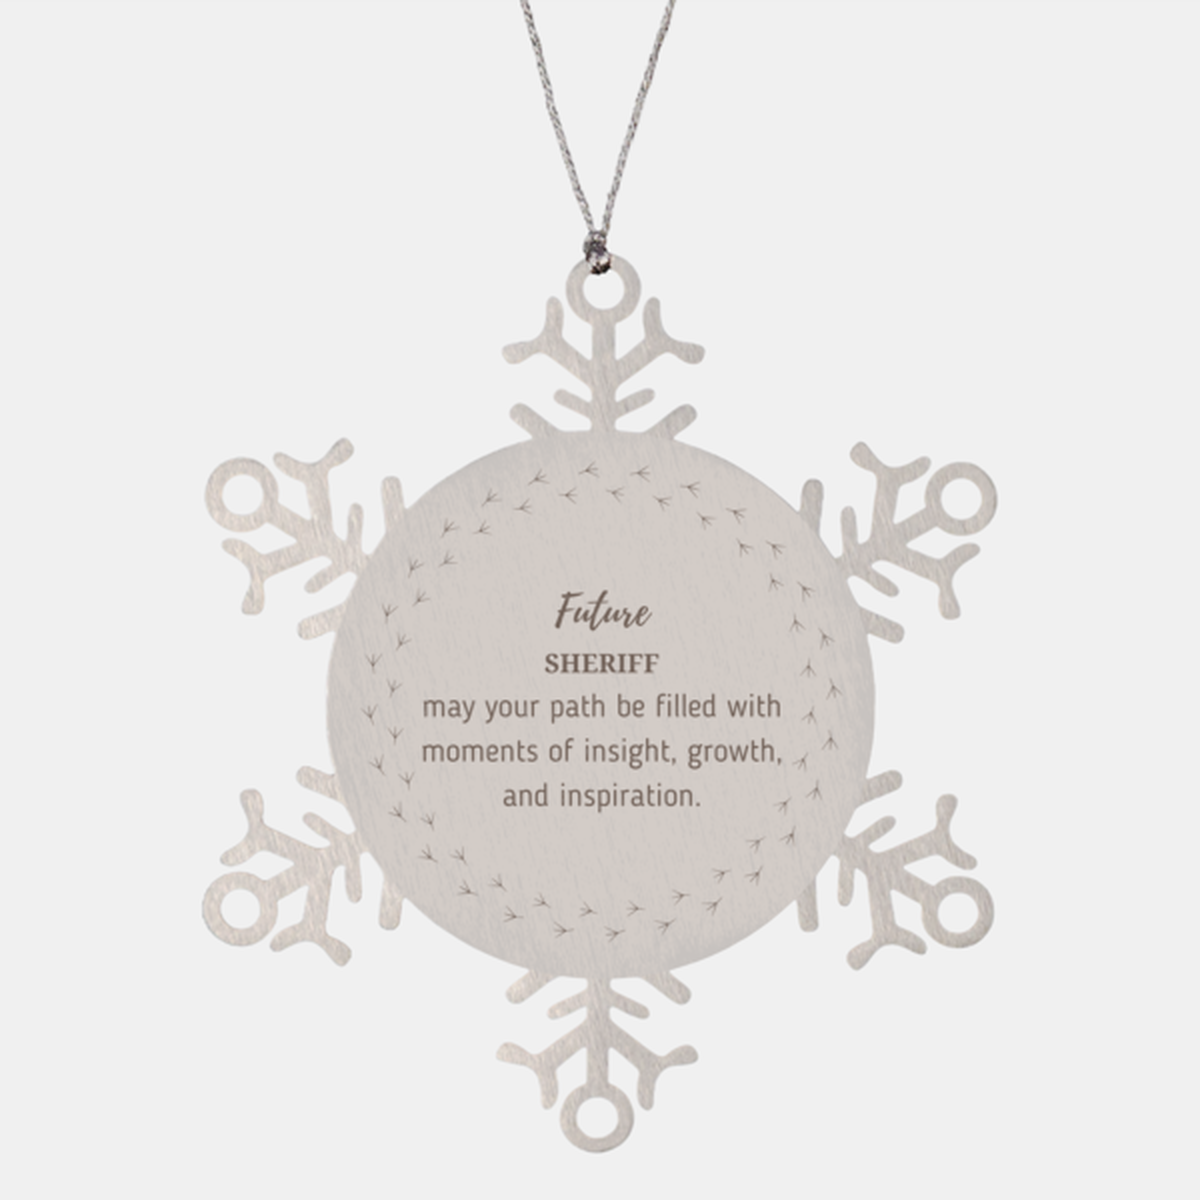 Future Sheriff Gifts, May your path be filled with moments of insight, Graduation Gifts for New Sheriff, Christmas Unique Snowflake Ornament For Men, Women, Friends